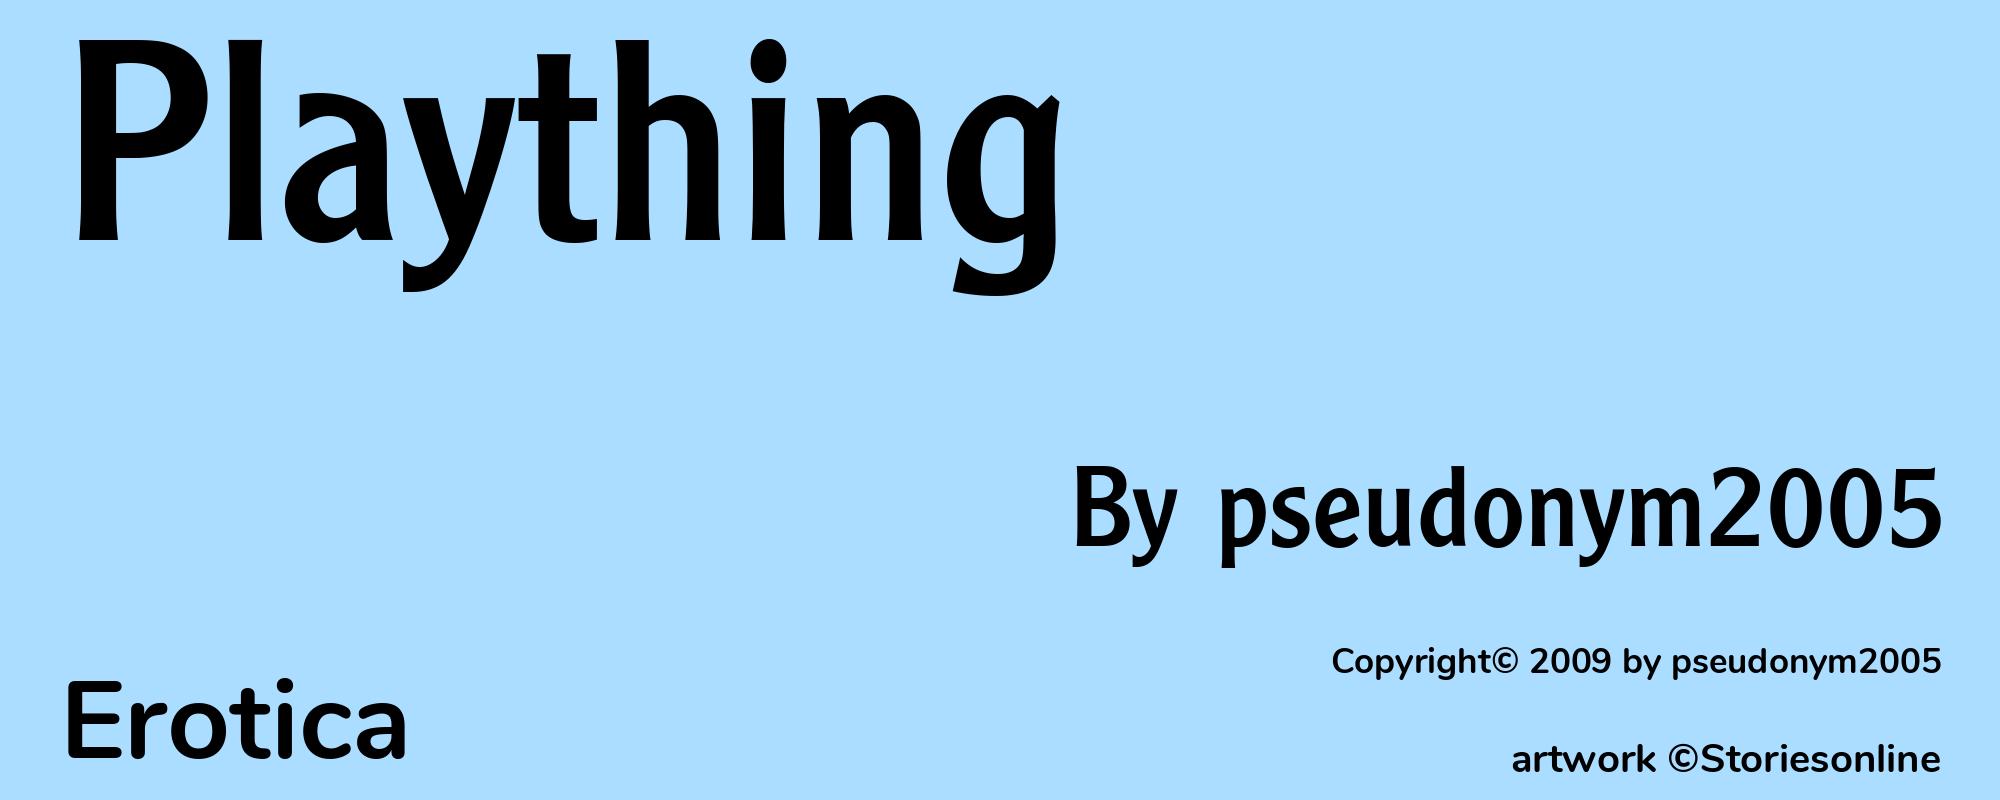 Plaything - Cover